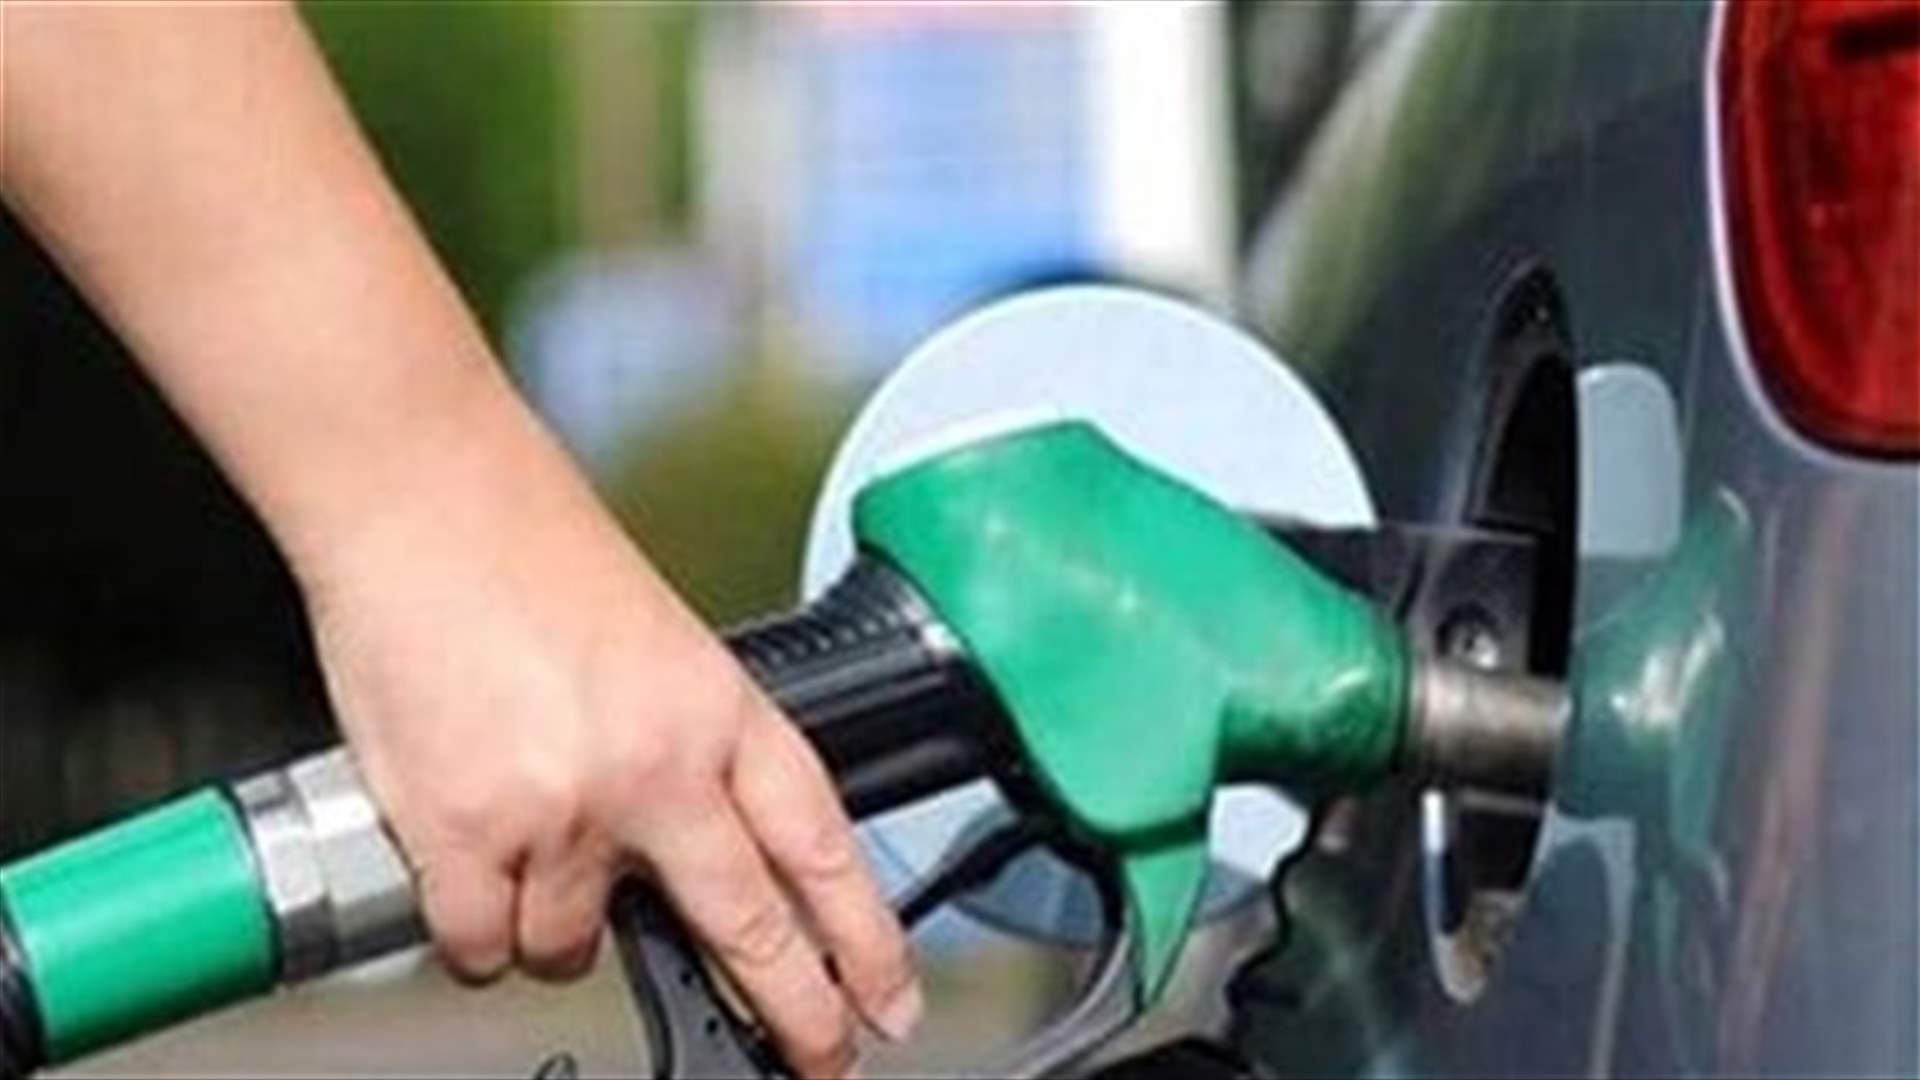 Price of gasoline sees further increase